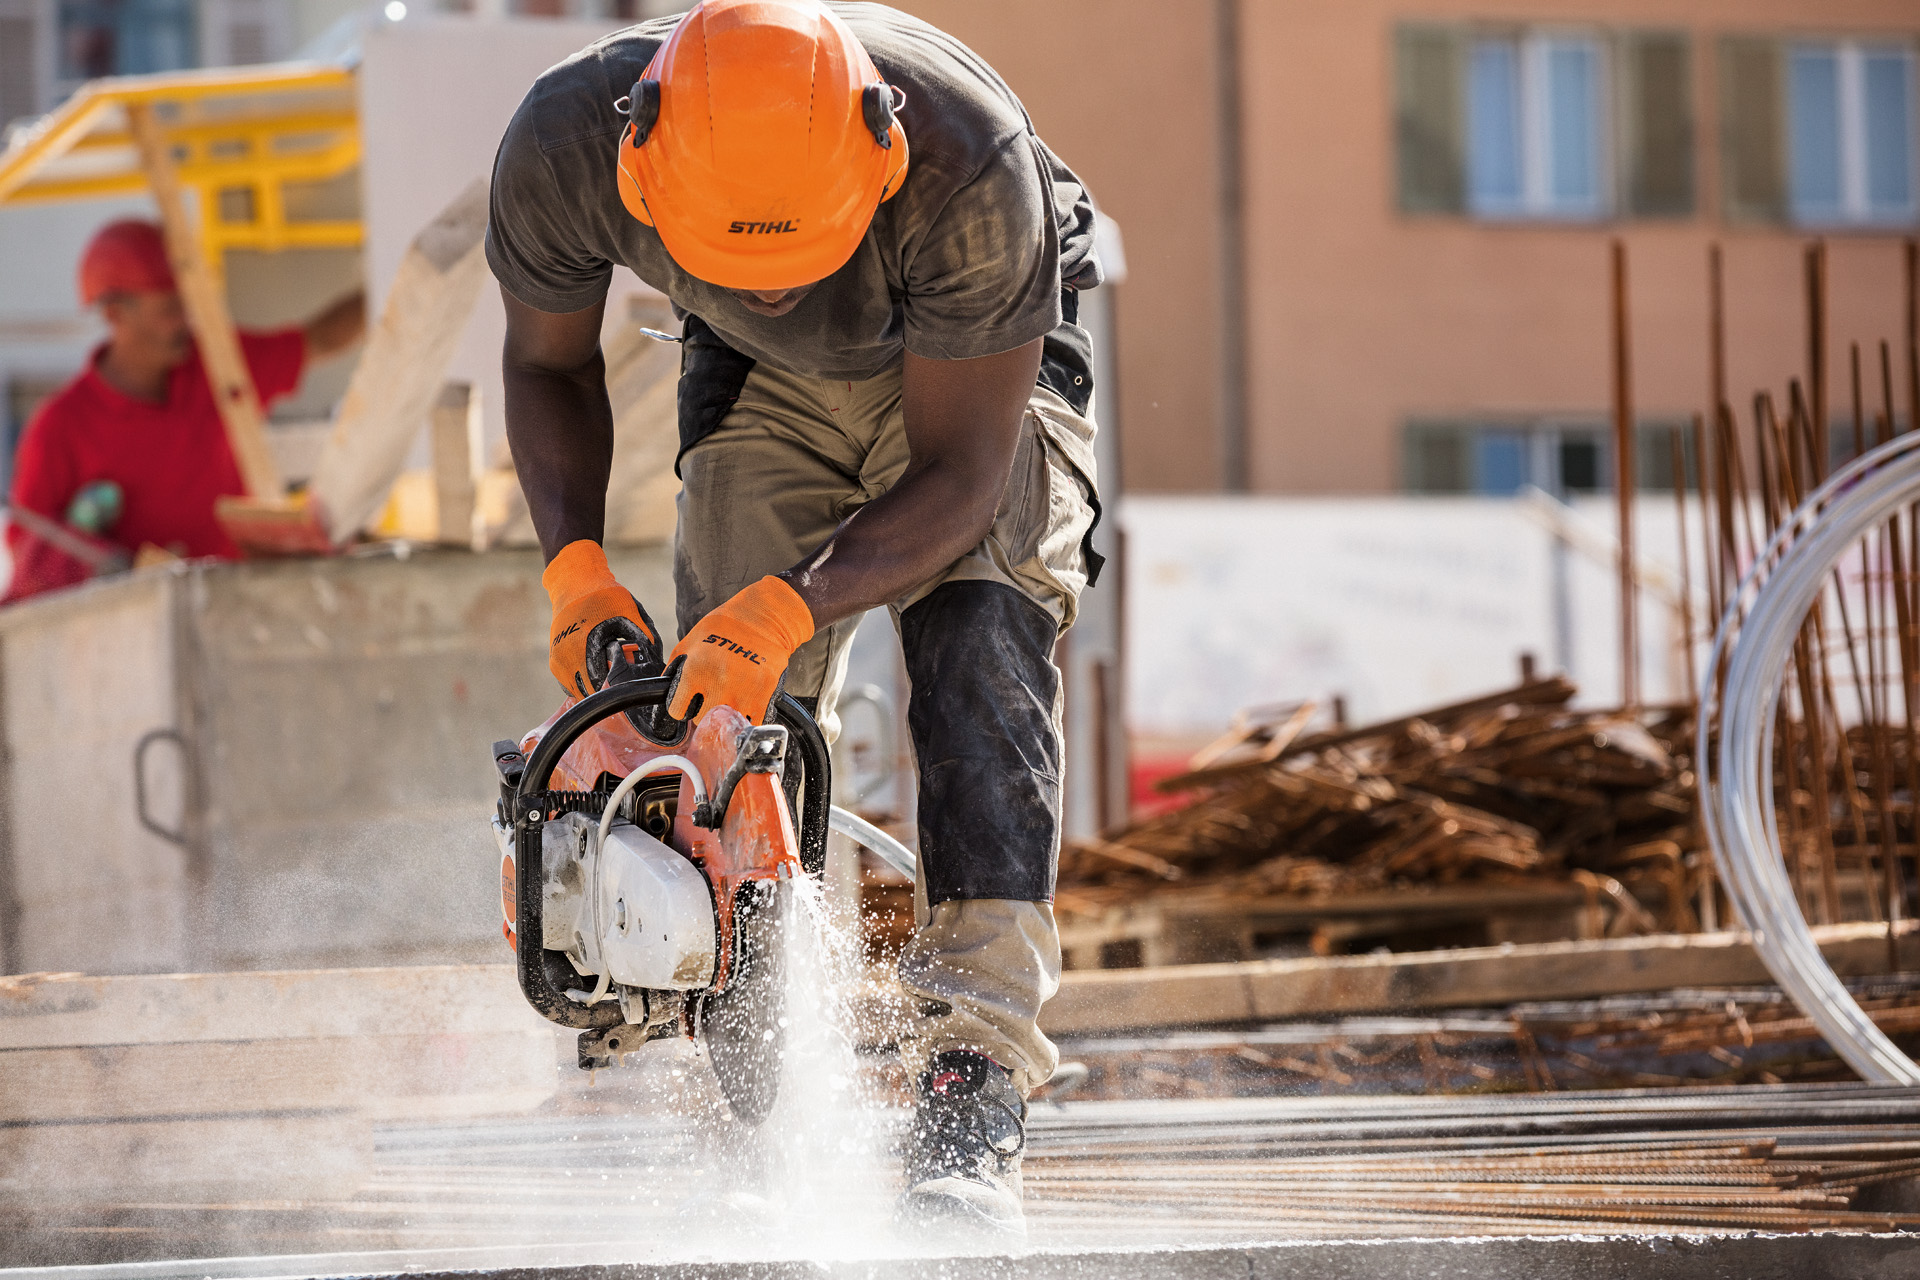 A man wearing protective equipment working with a STIHL TS 500i cut-off machine on a construction site